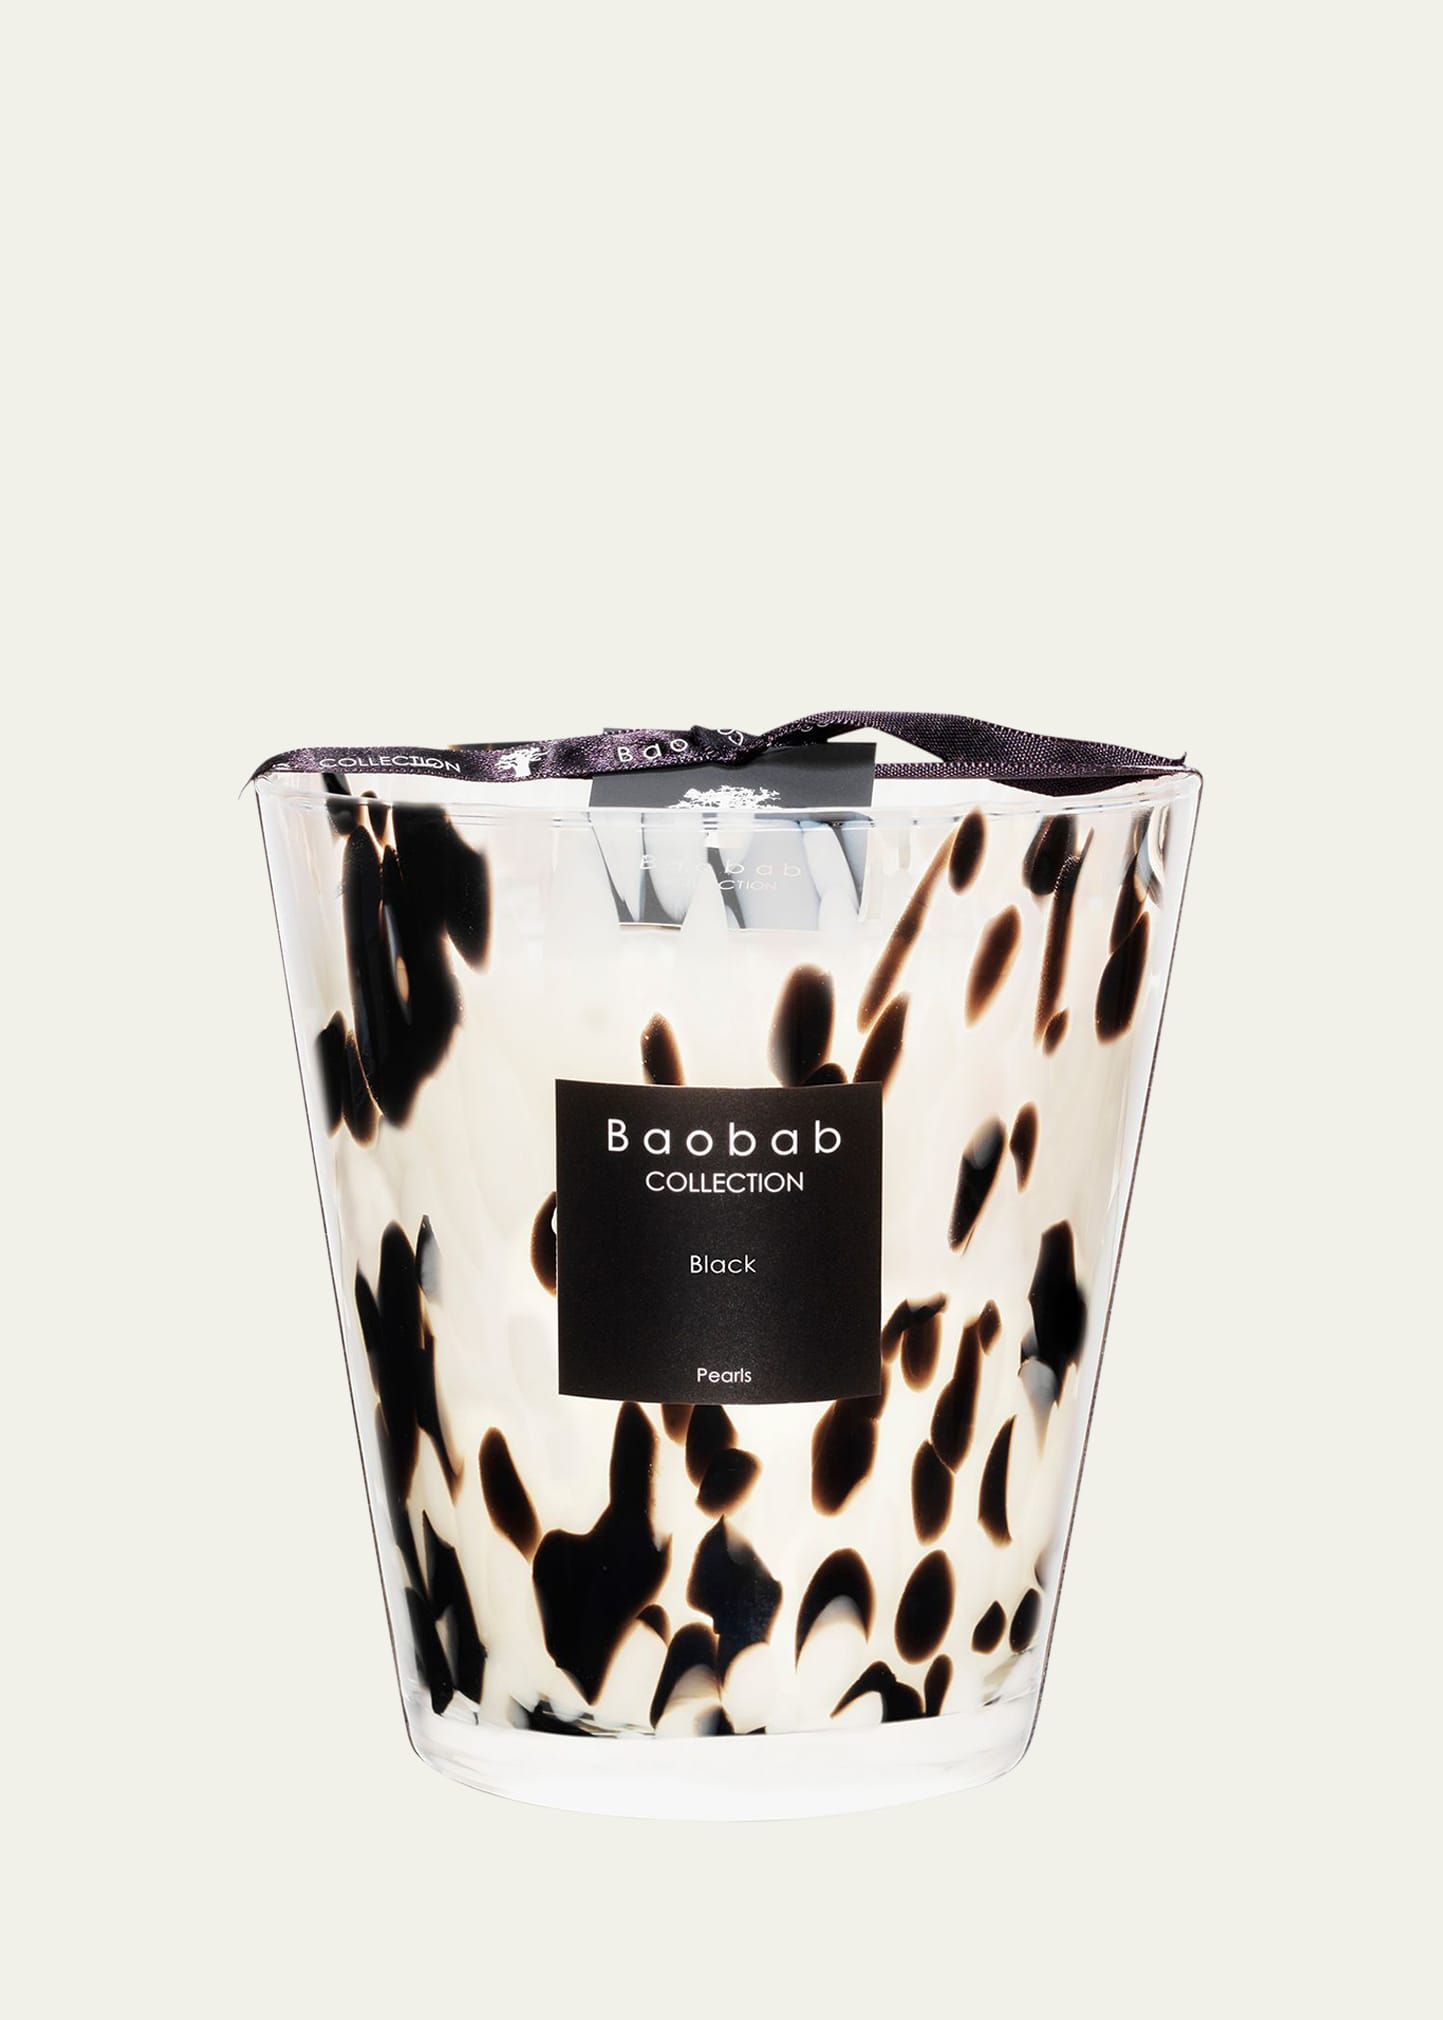 Baobab Collection Black Pearls Scented Candle, 6.3"